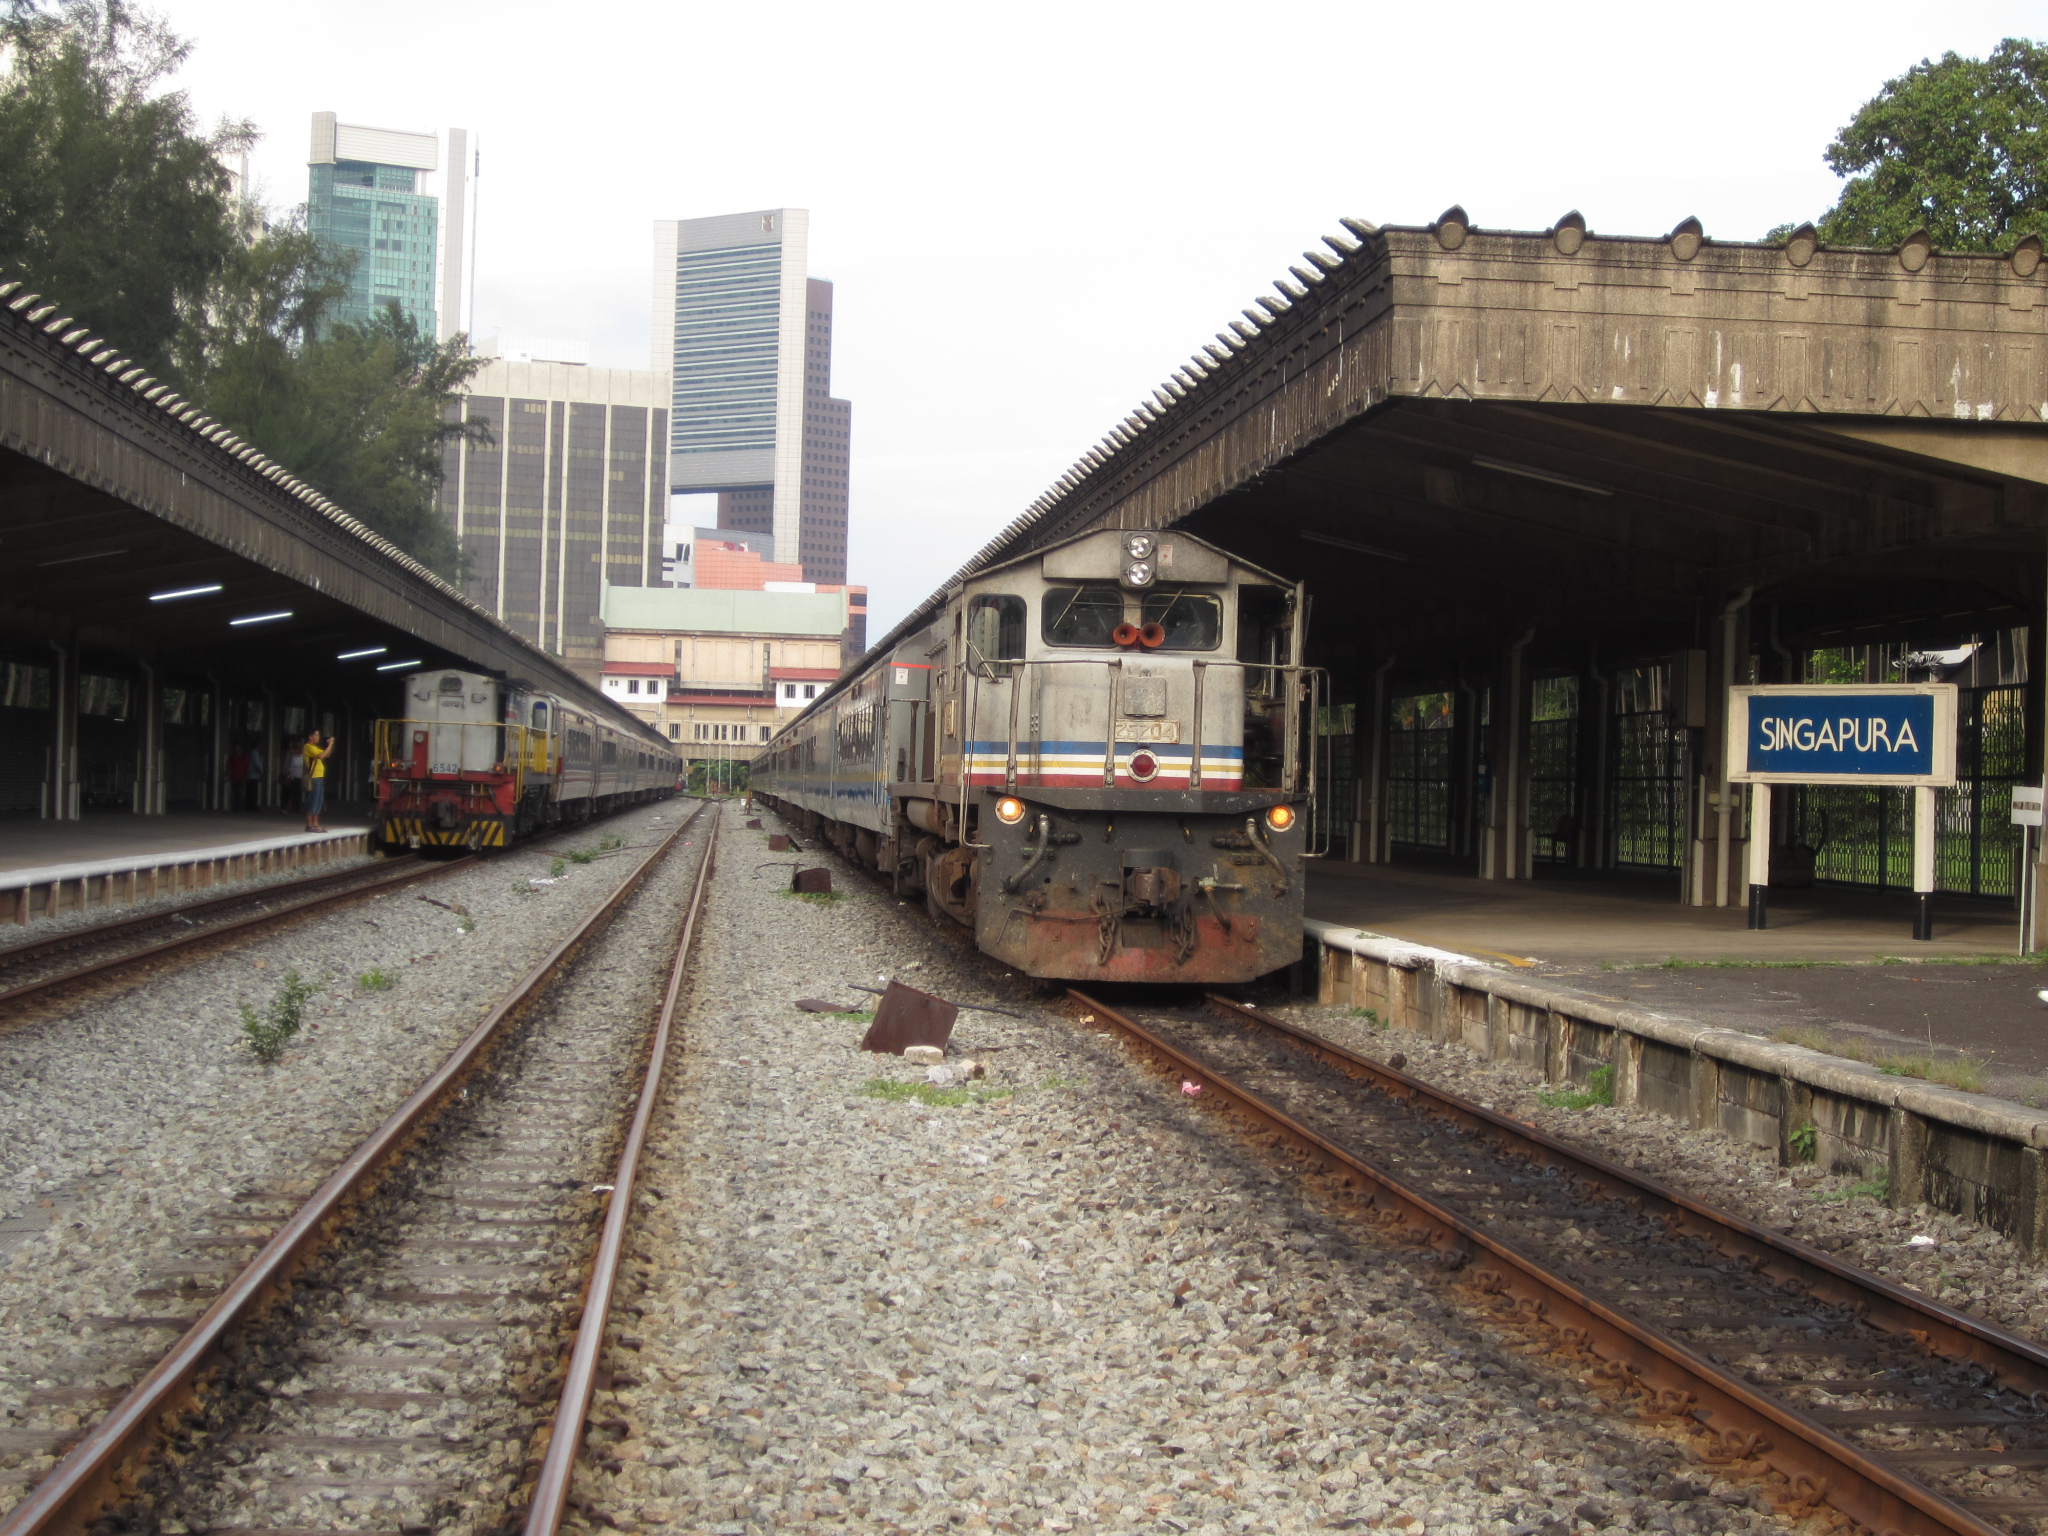 10 Must-See Off-the-Beaten-Path Architecture in Singapore - Old Railway Station